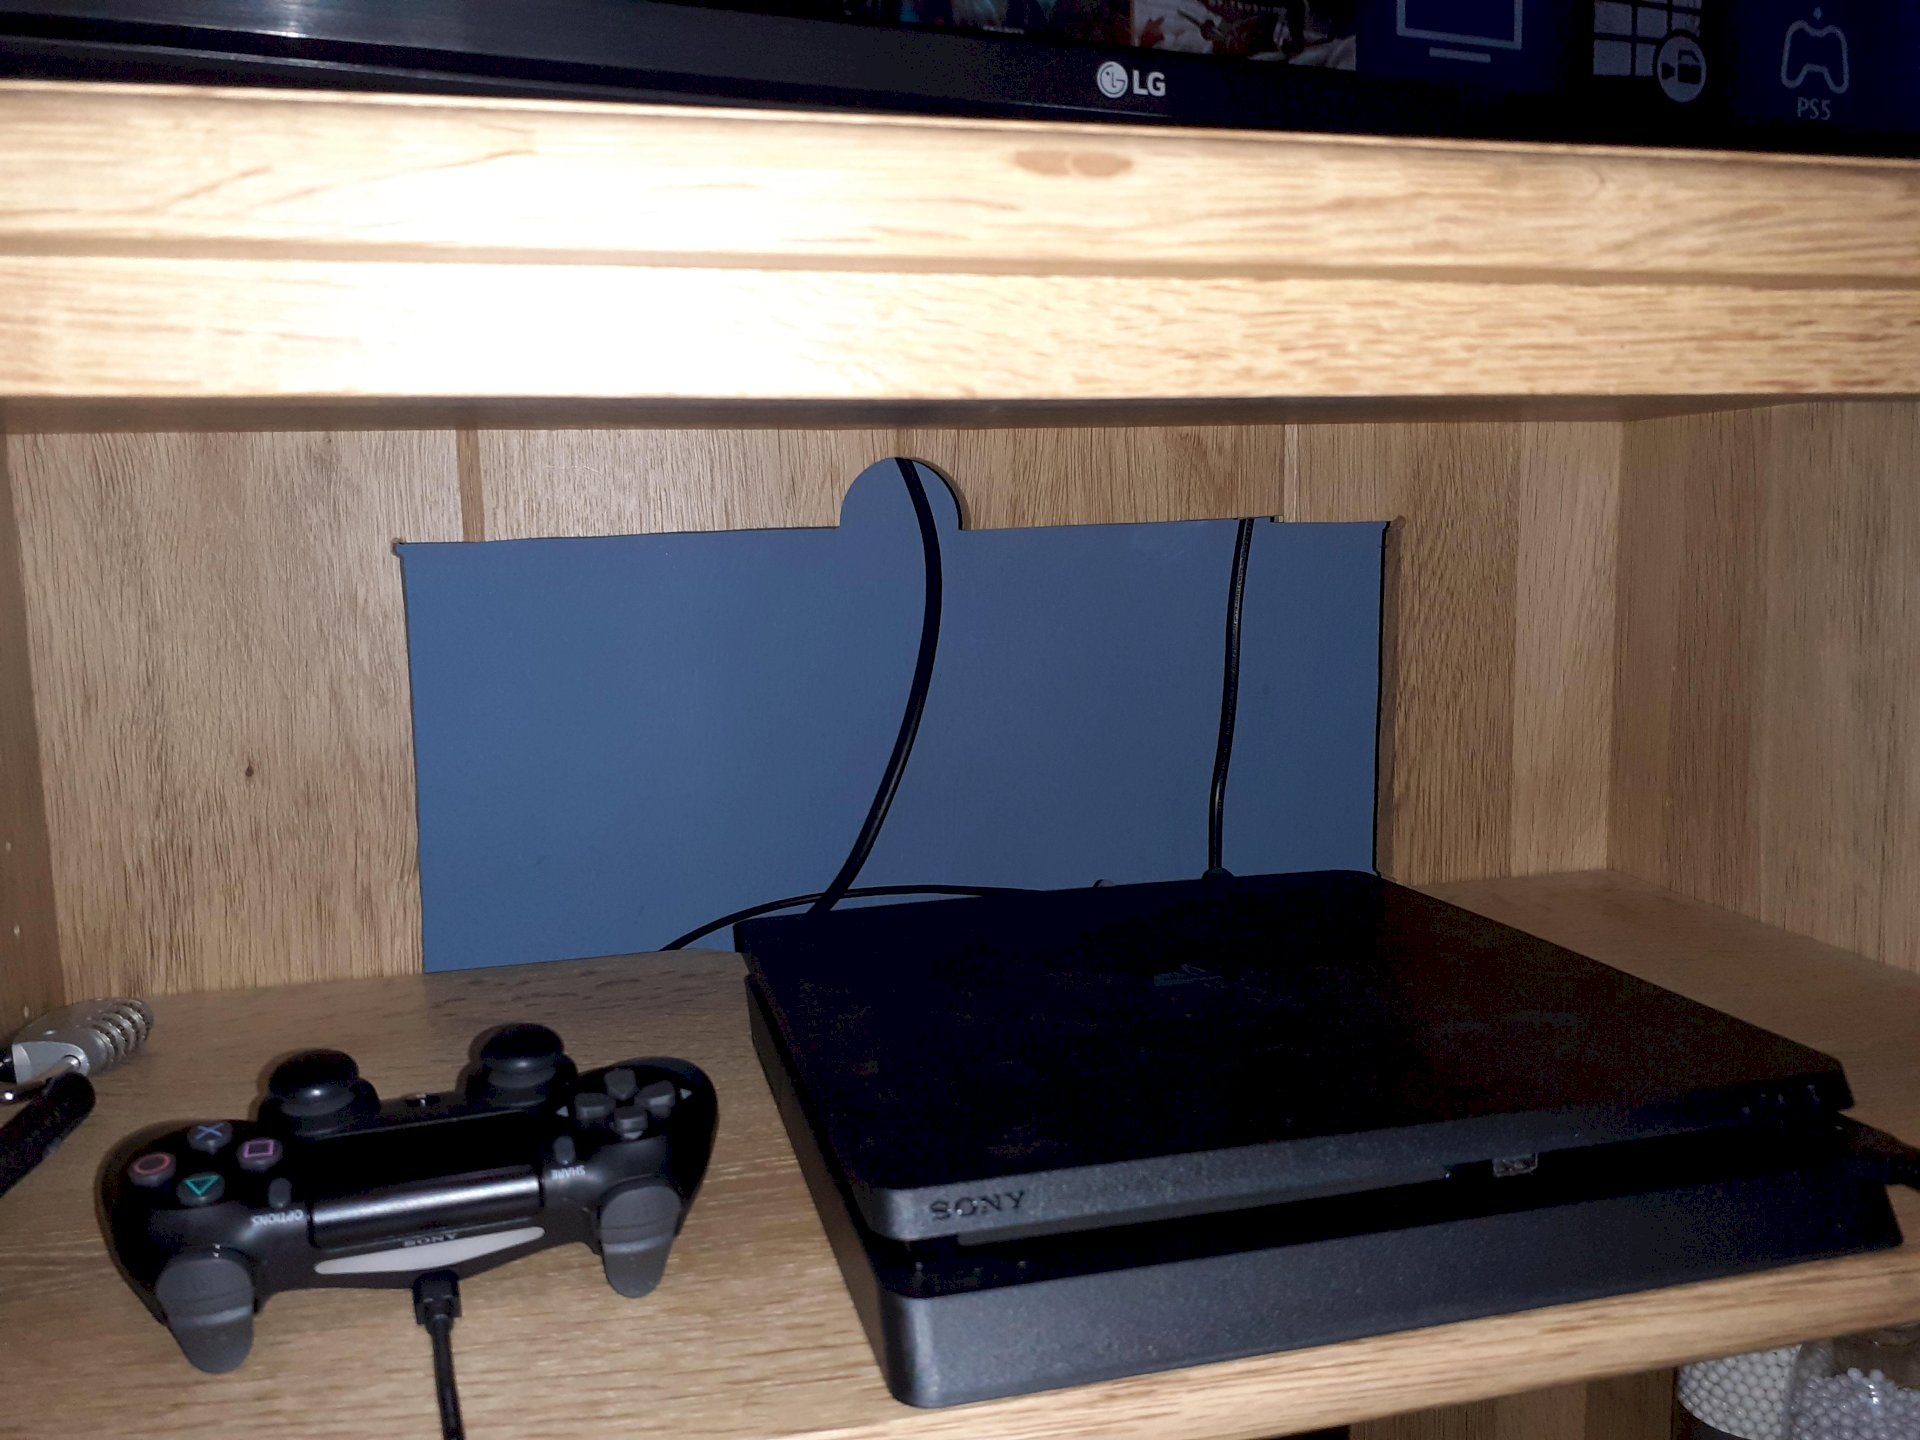 Is PS4 getting enough air